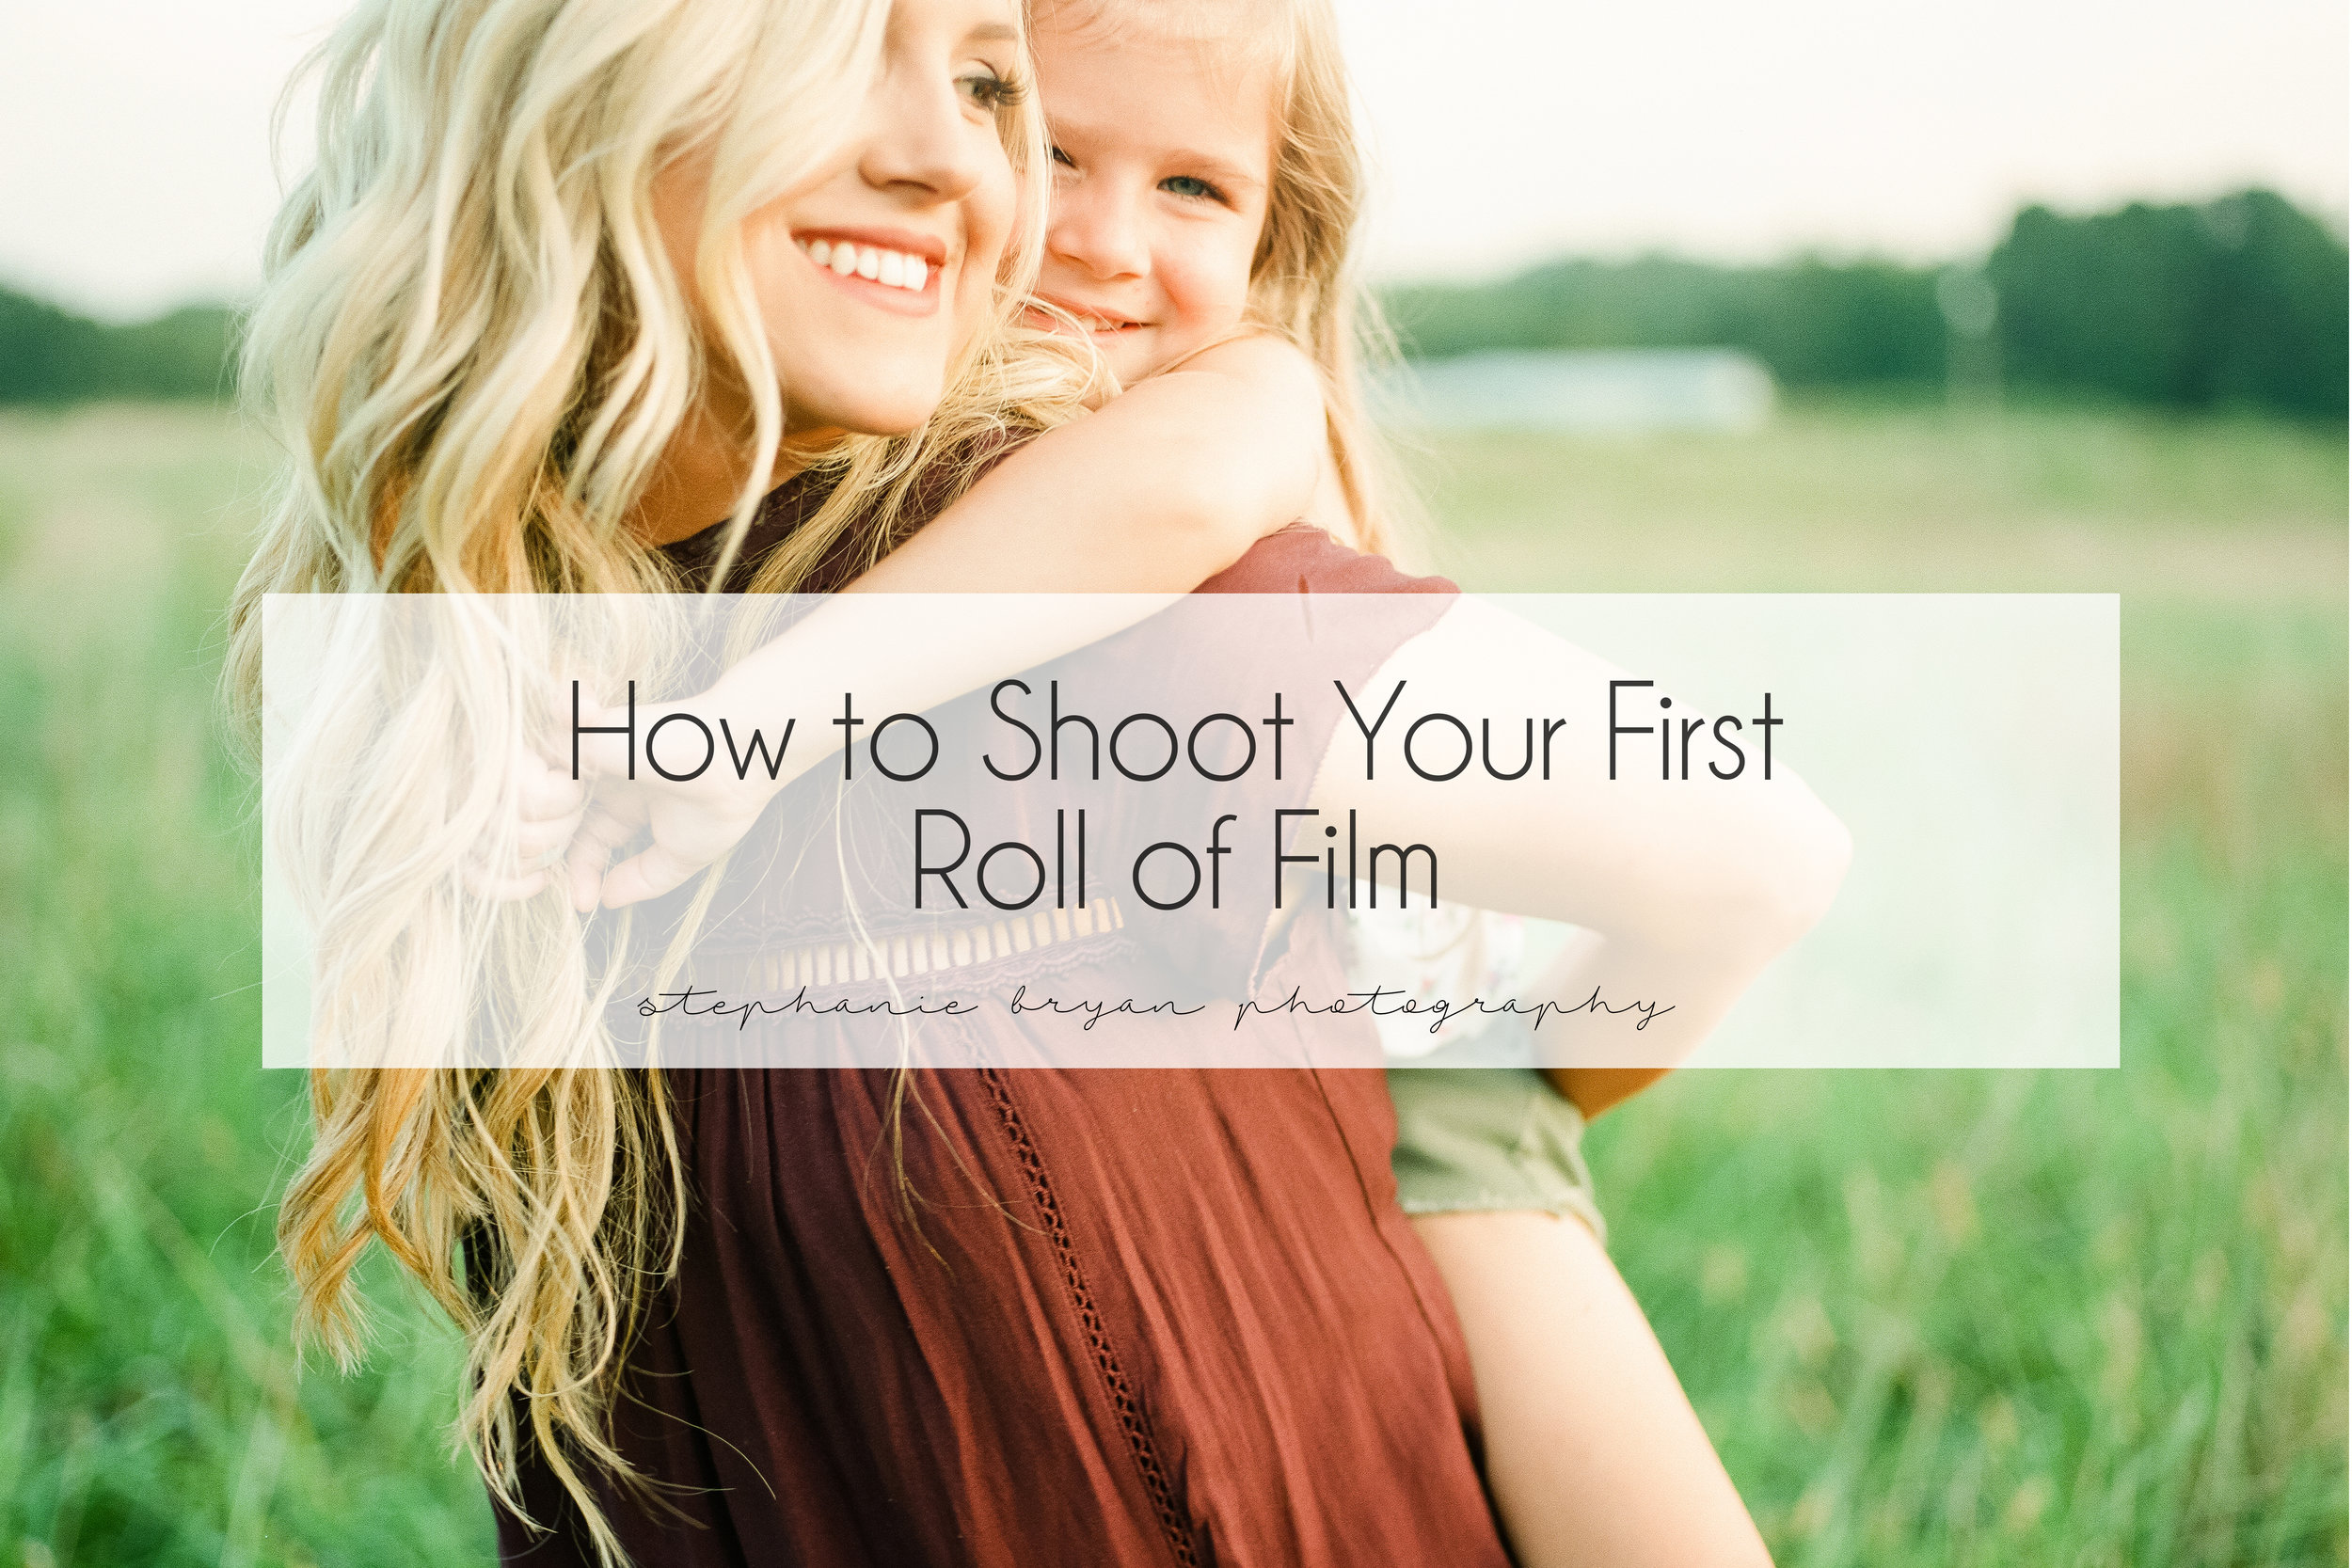 how-to-shoot-your-first-roll-of-film-film-camera-analogue-photography-tutorial.jpg